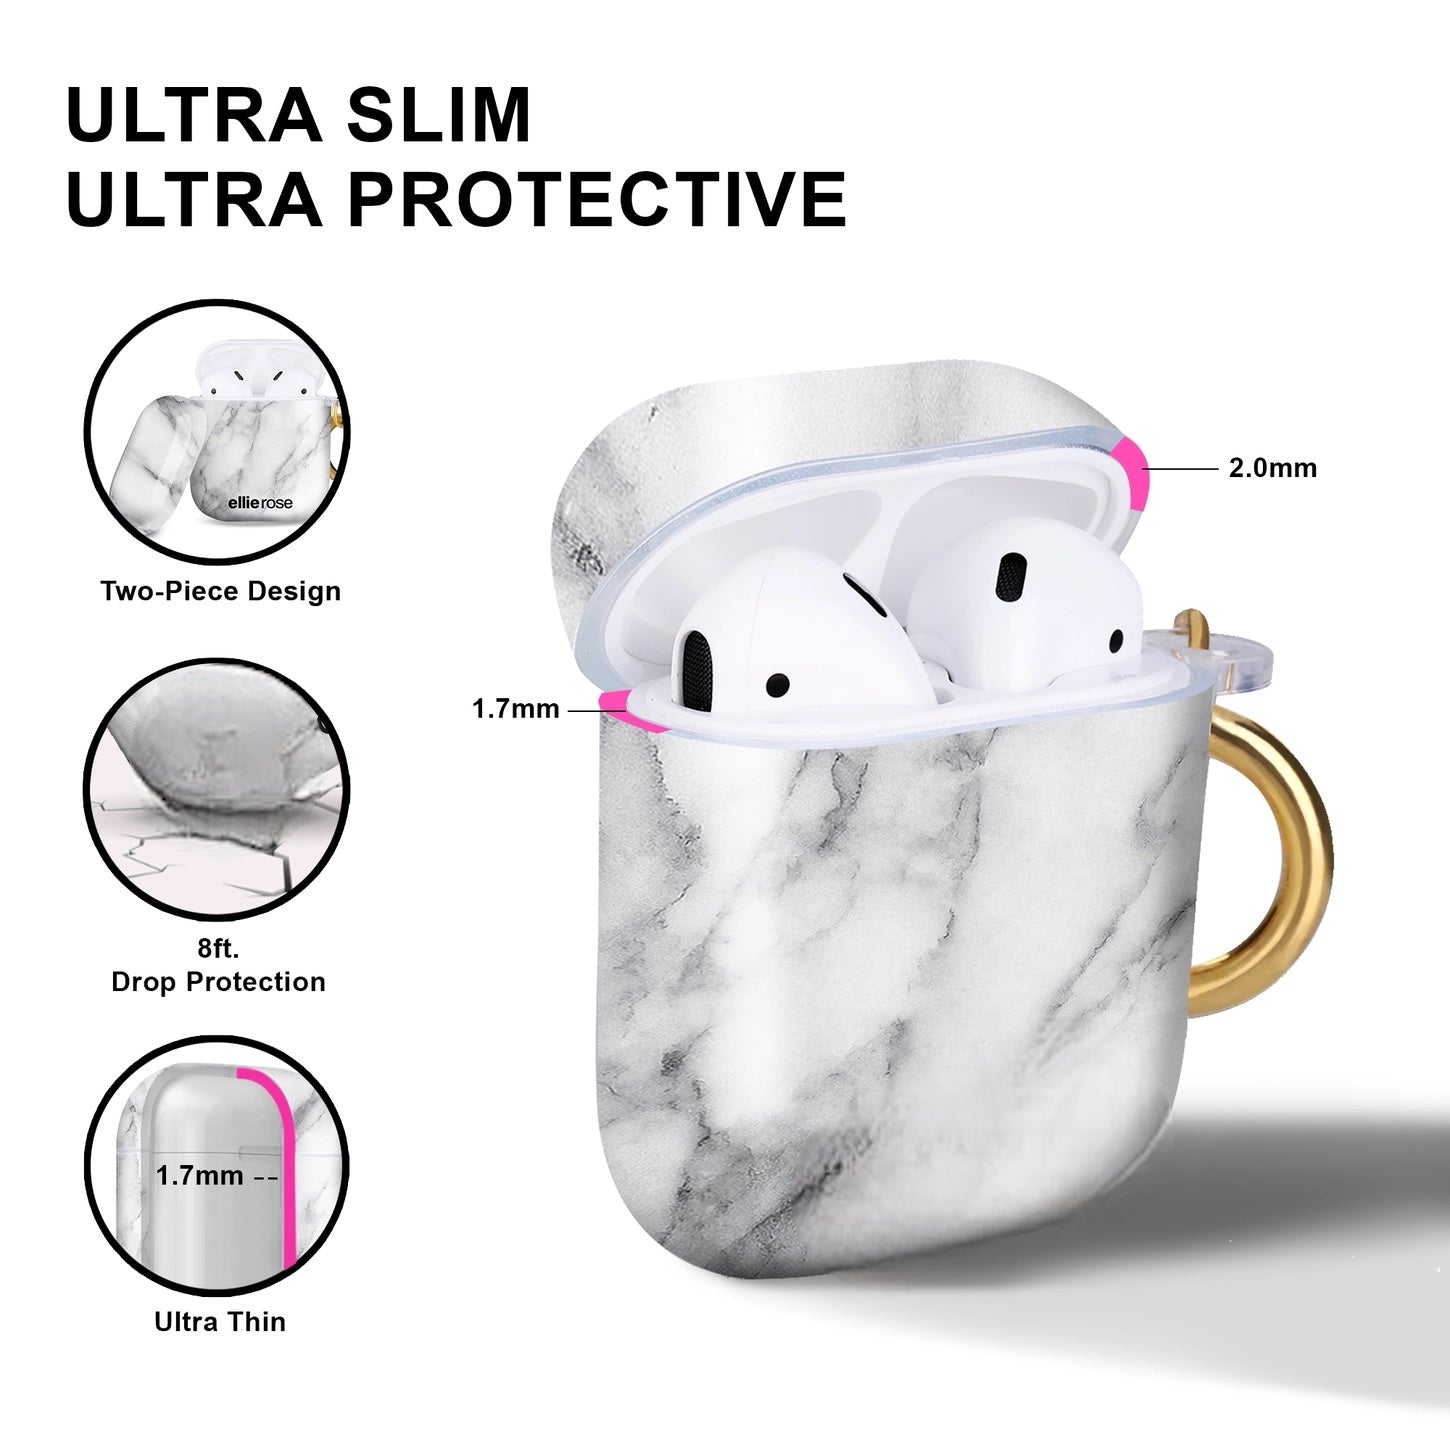 AirPods case - white marble